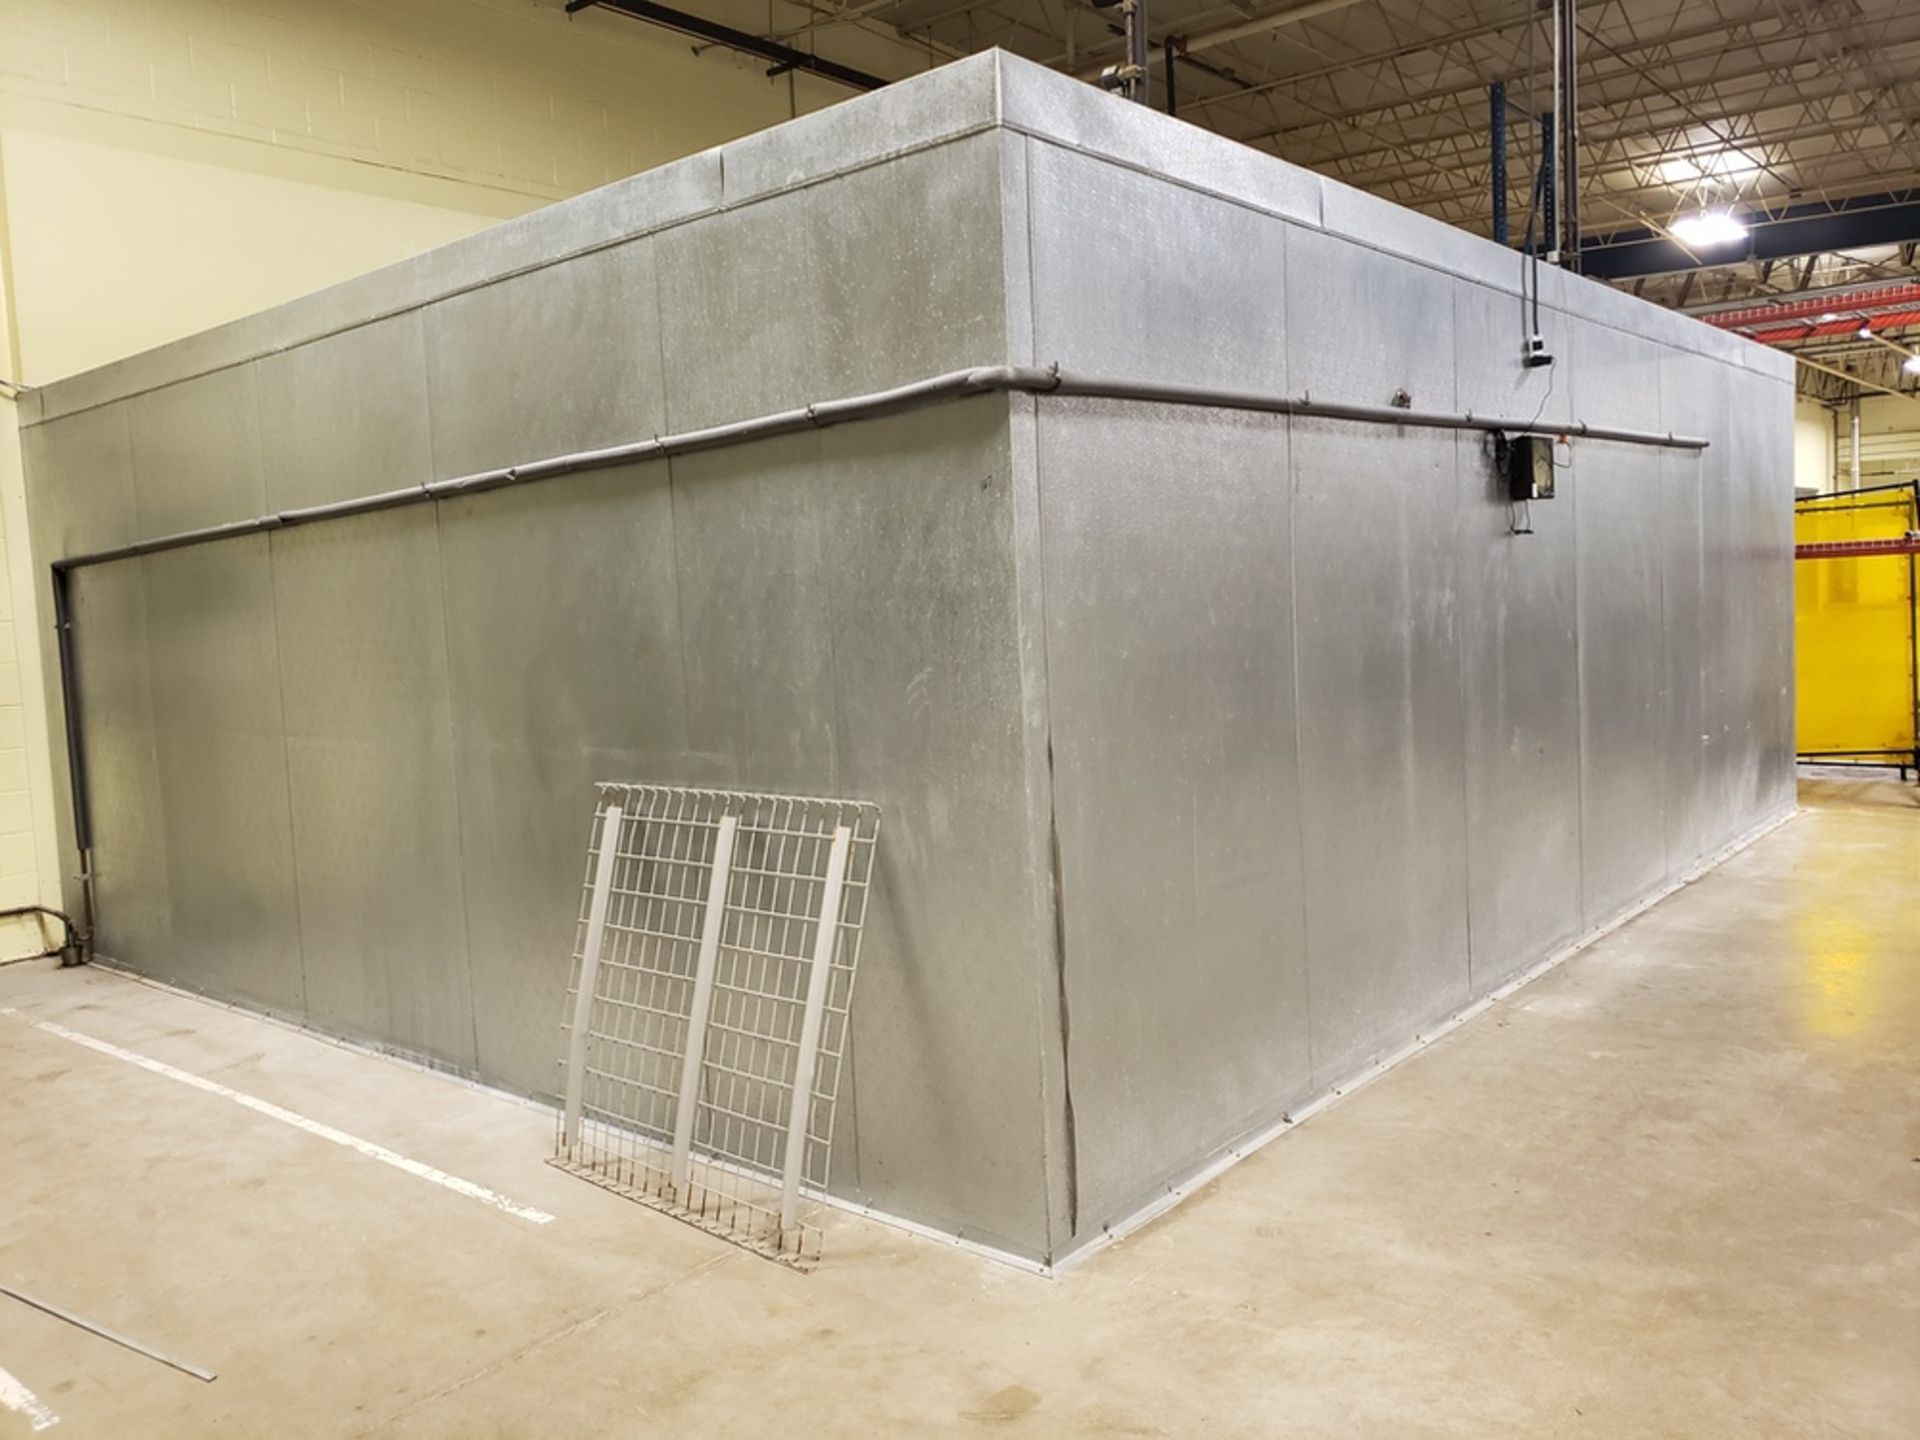 Ingredient Storage Cold Box, 24' Wide X 20' Deep X 92" High | Rig Fee: $6500 - Image 2 of 4